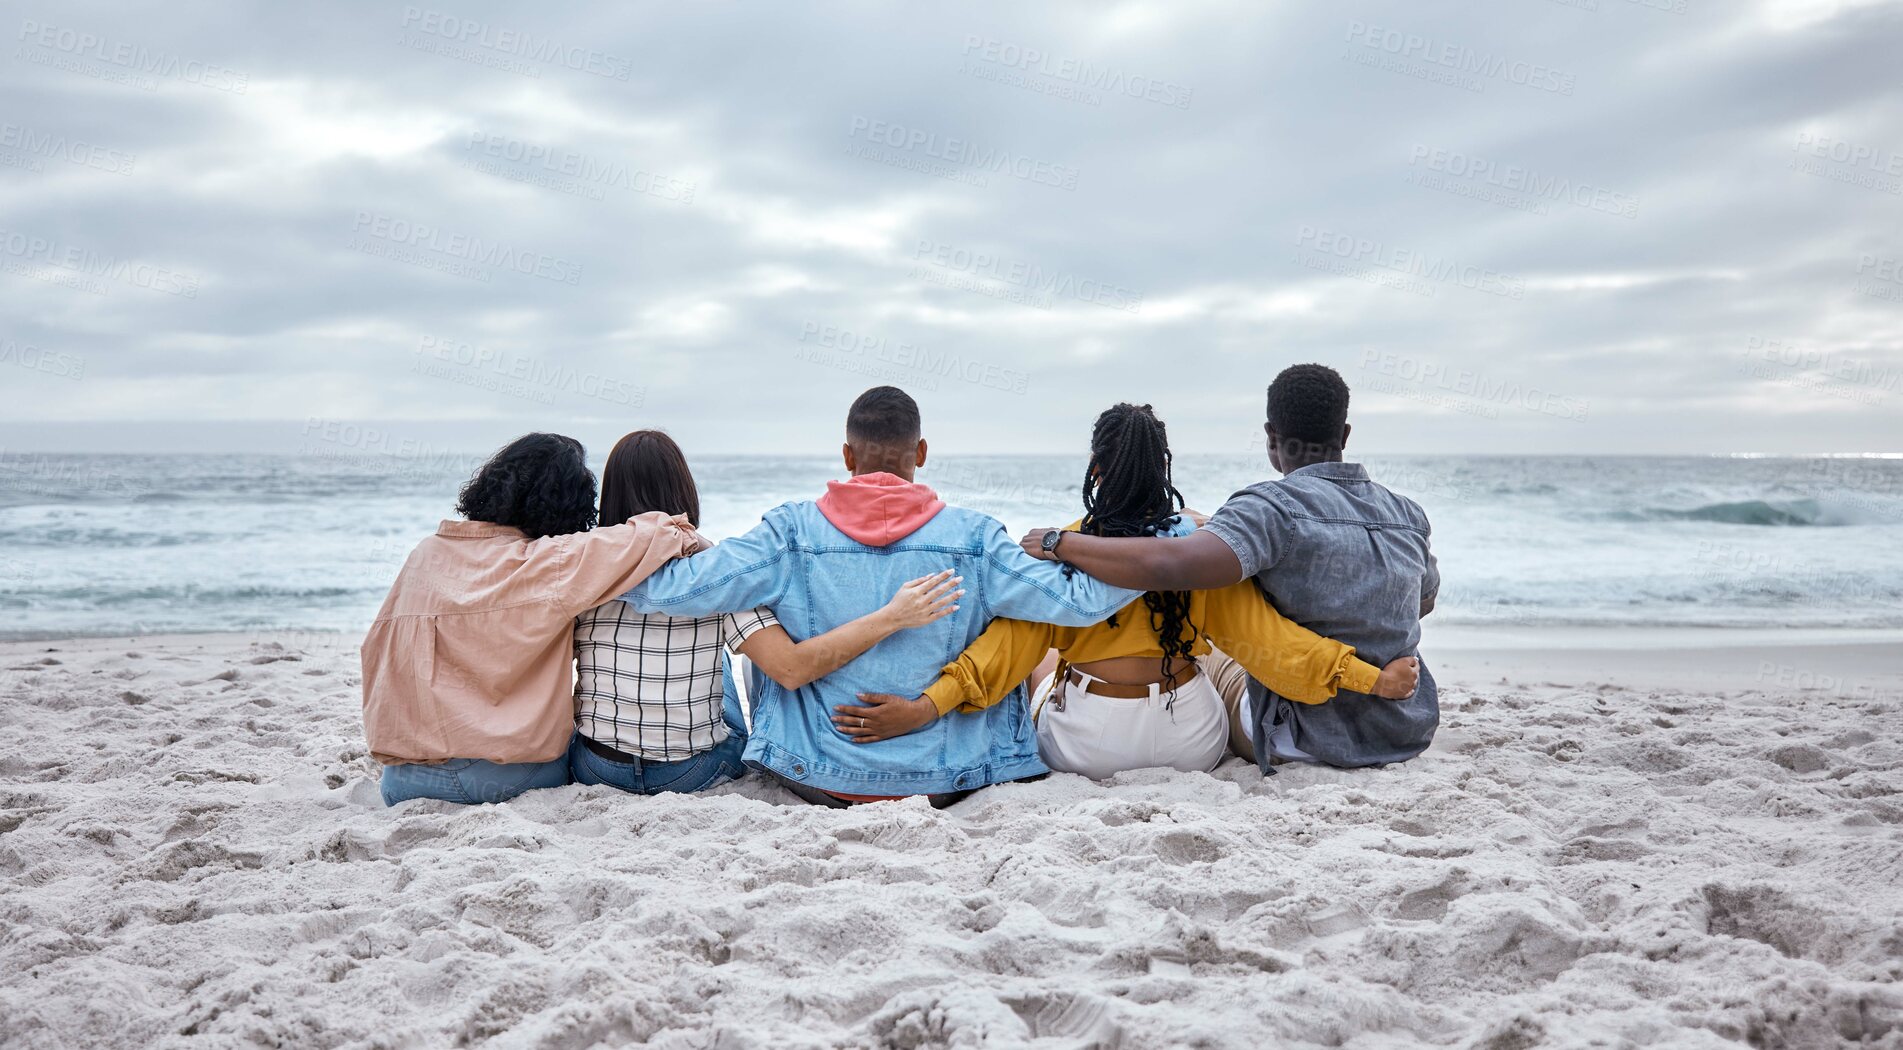 Buy stock photo Diversity, hug or friends on beach sand to relax on calm holiday, vacation bonding in nature together. Back view, men and women group relaxing at sea enjoy traveling on ocean trips in Miami, Florida